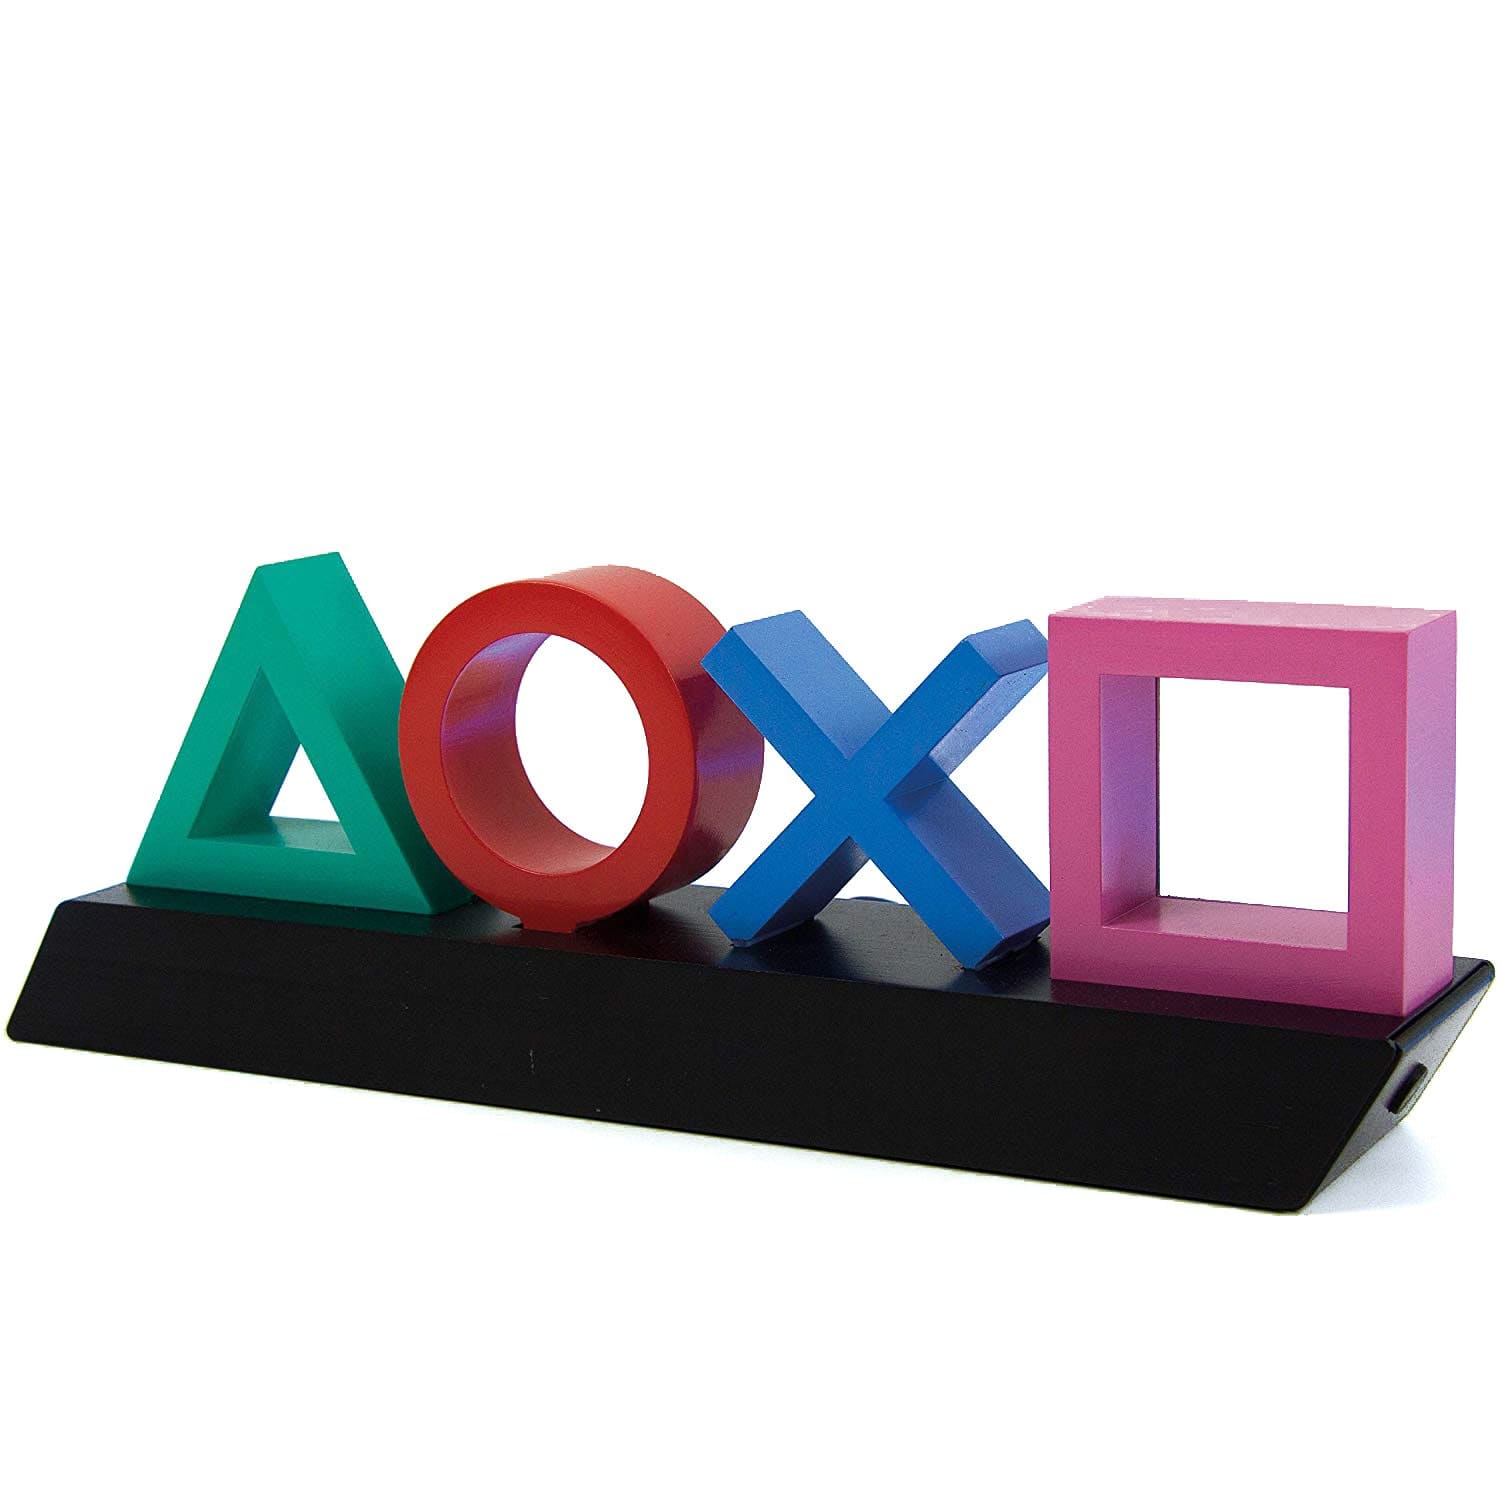 Playstation icons light made by Paladone, sold by HIDEit Mounts.